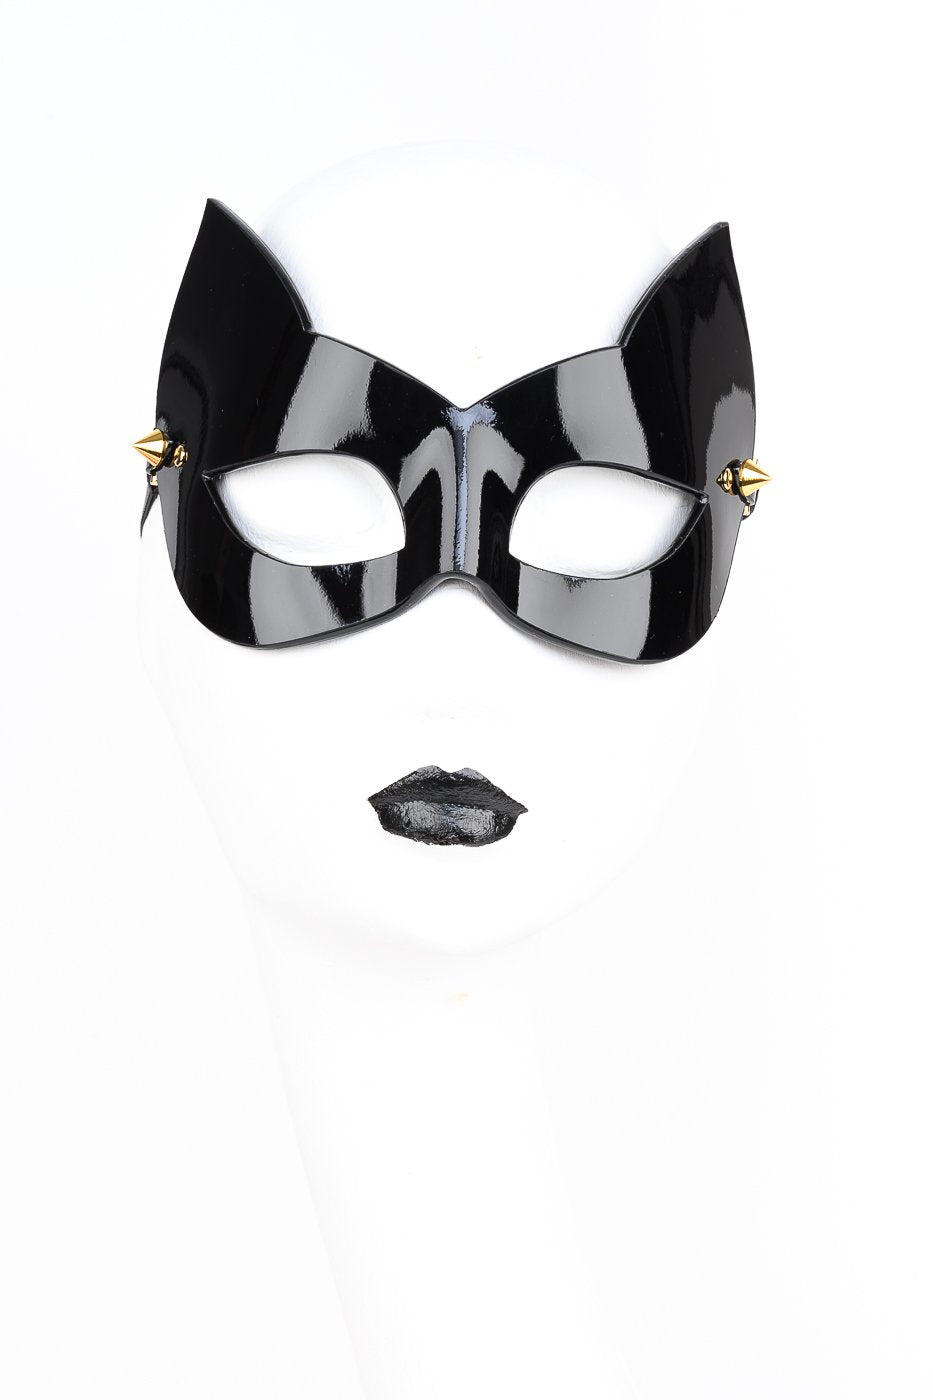 Rica Molded Kitten Mask in Black with gold spikes by Fraulein Kink